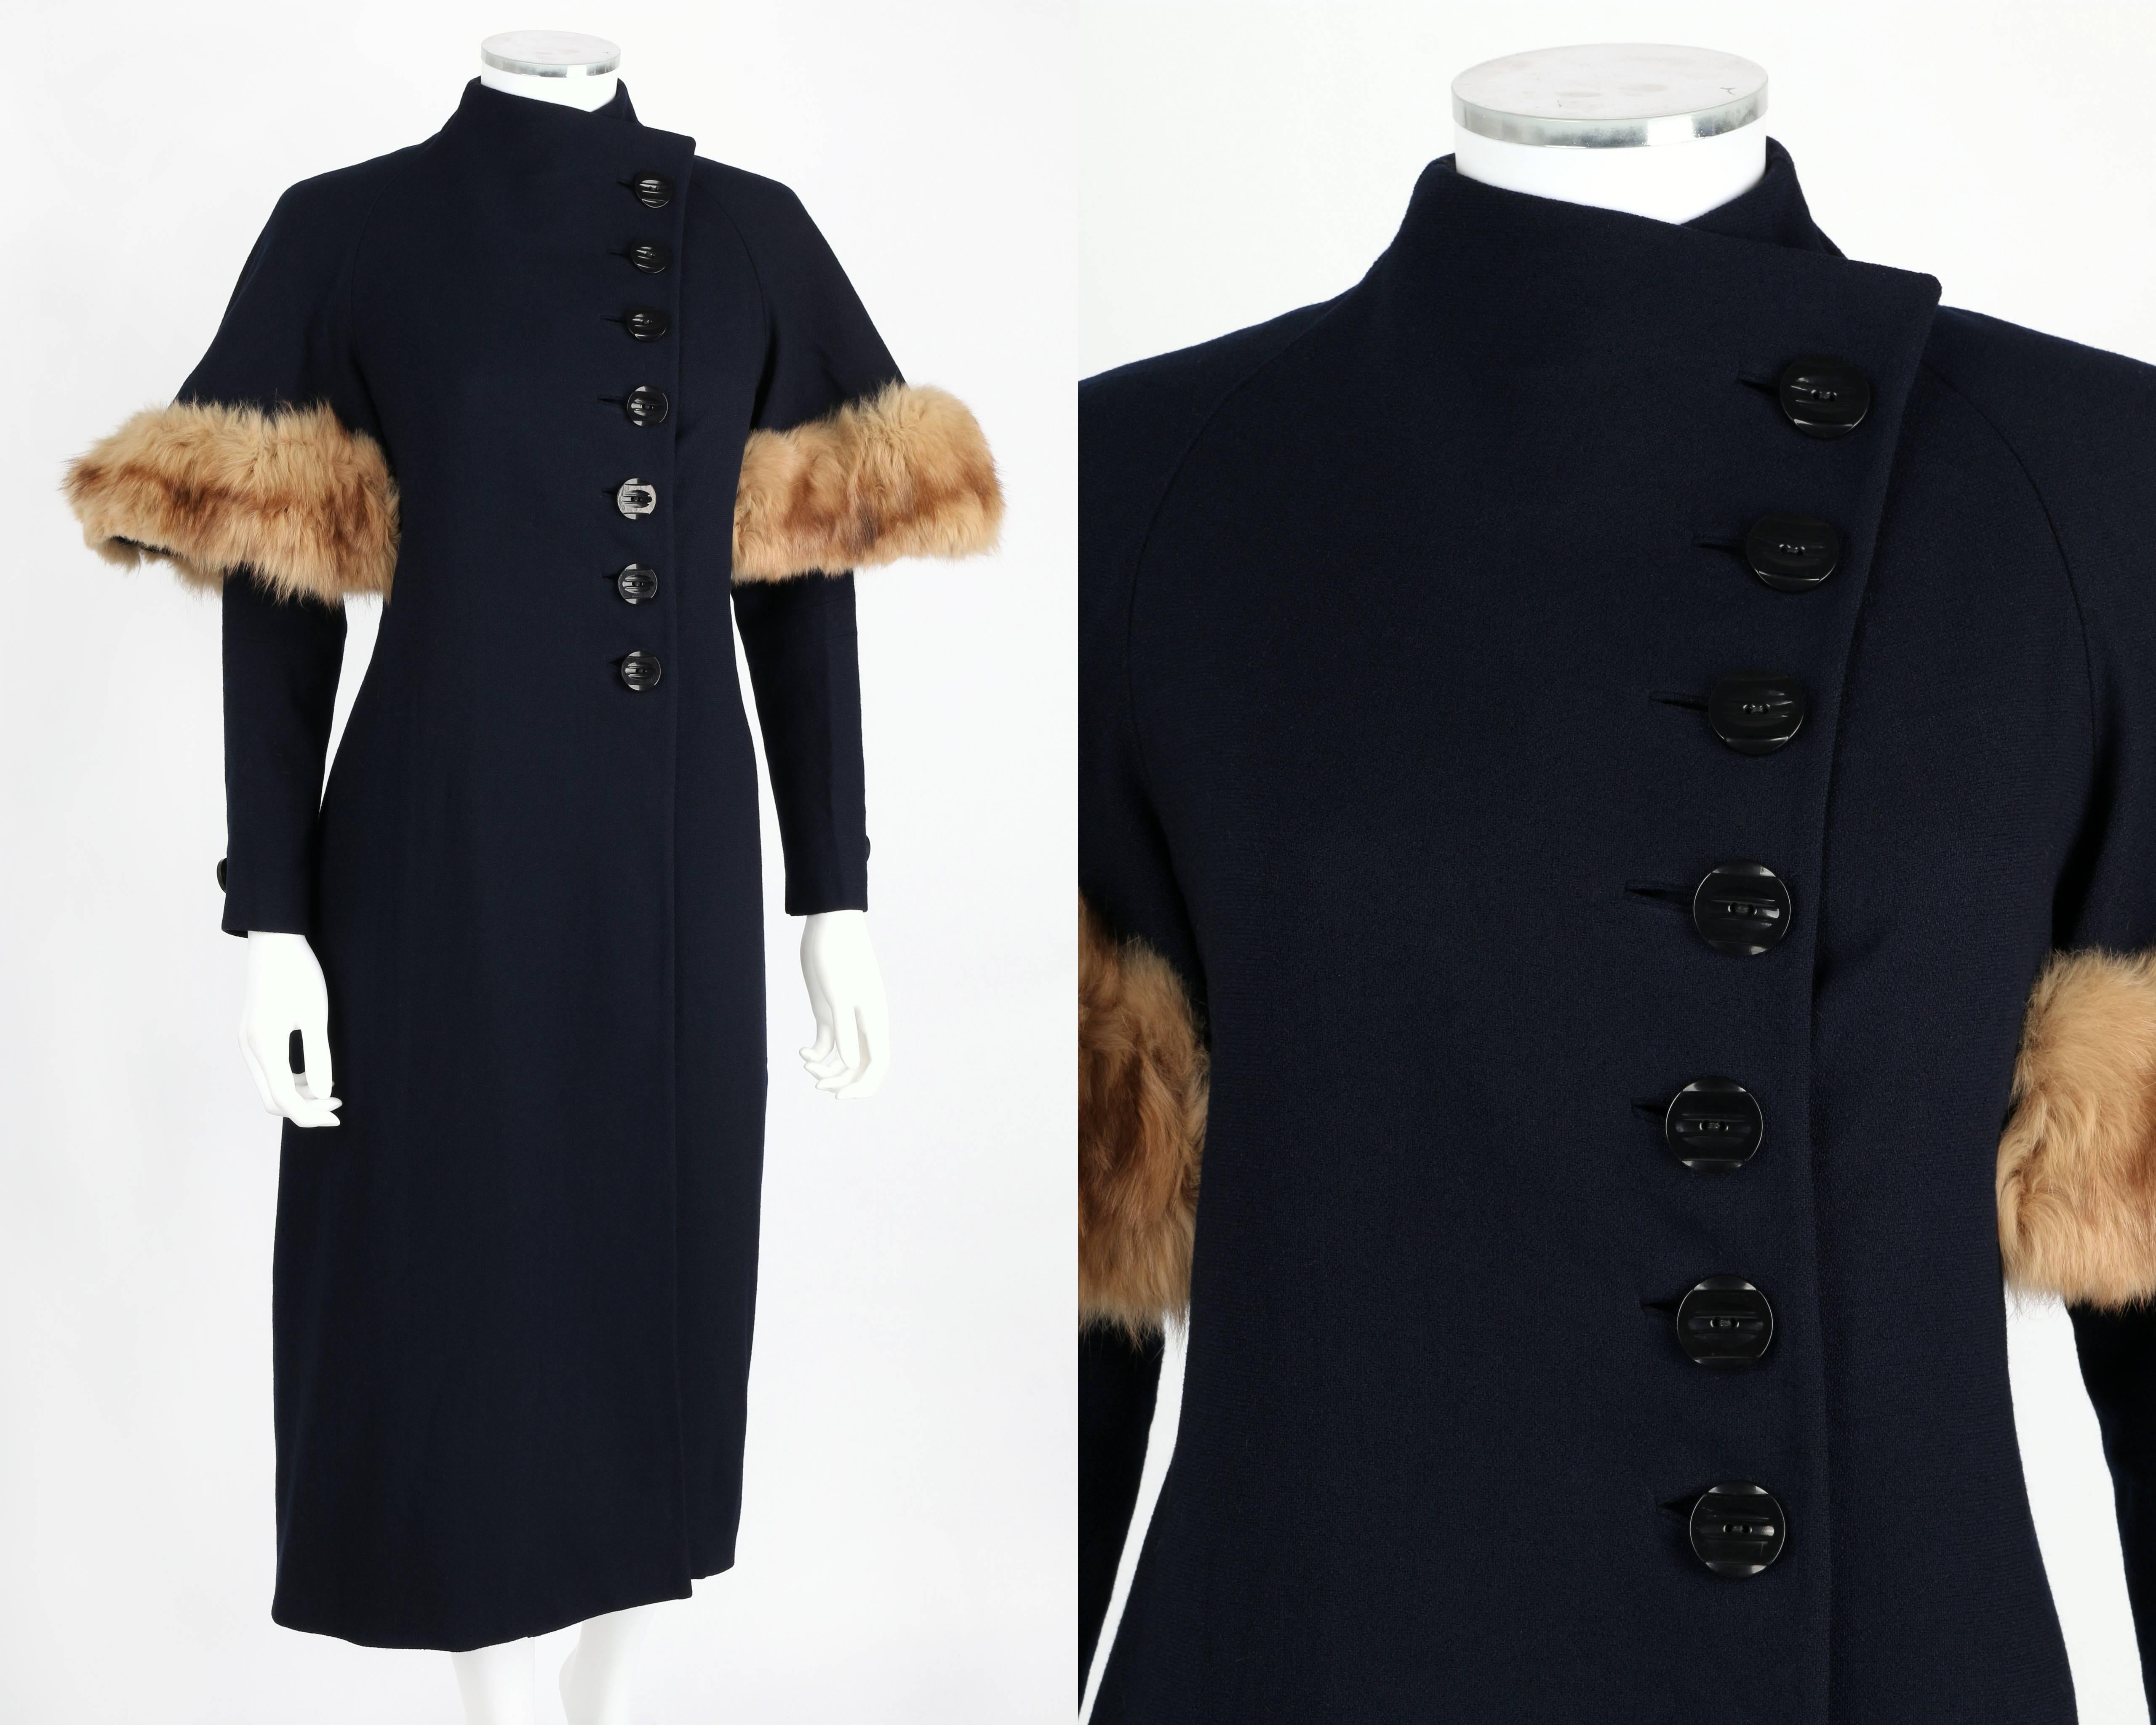 Vintage 1930's couture-made wool & fox fur trim coat. Long dolman sleeves with single-button detail at cuff. Genuine fox fur trim sleeve overlay. Asymmetrical front with seven-button closures. Built-up neckline. Fully lined. Interior tie and loop at